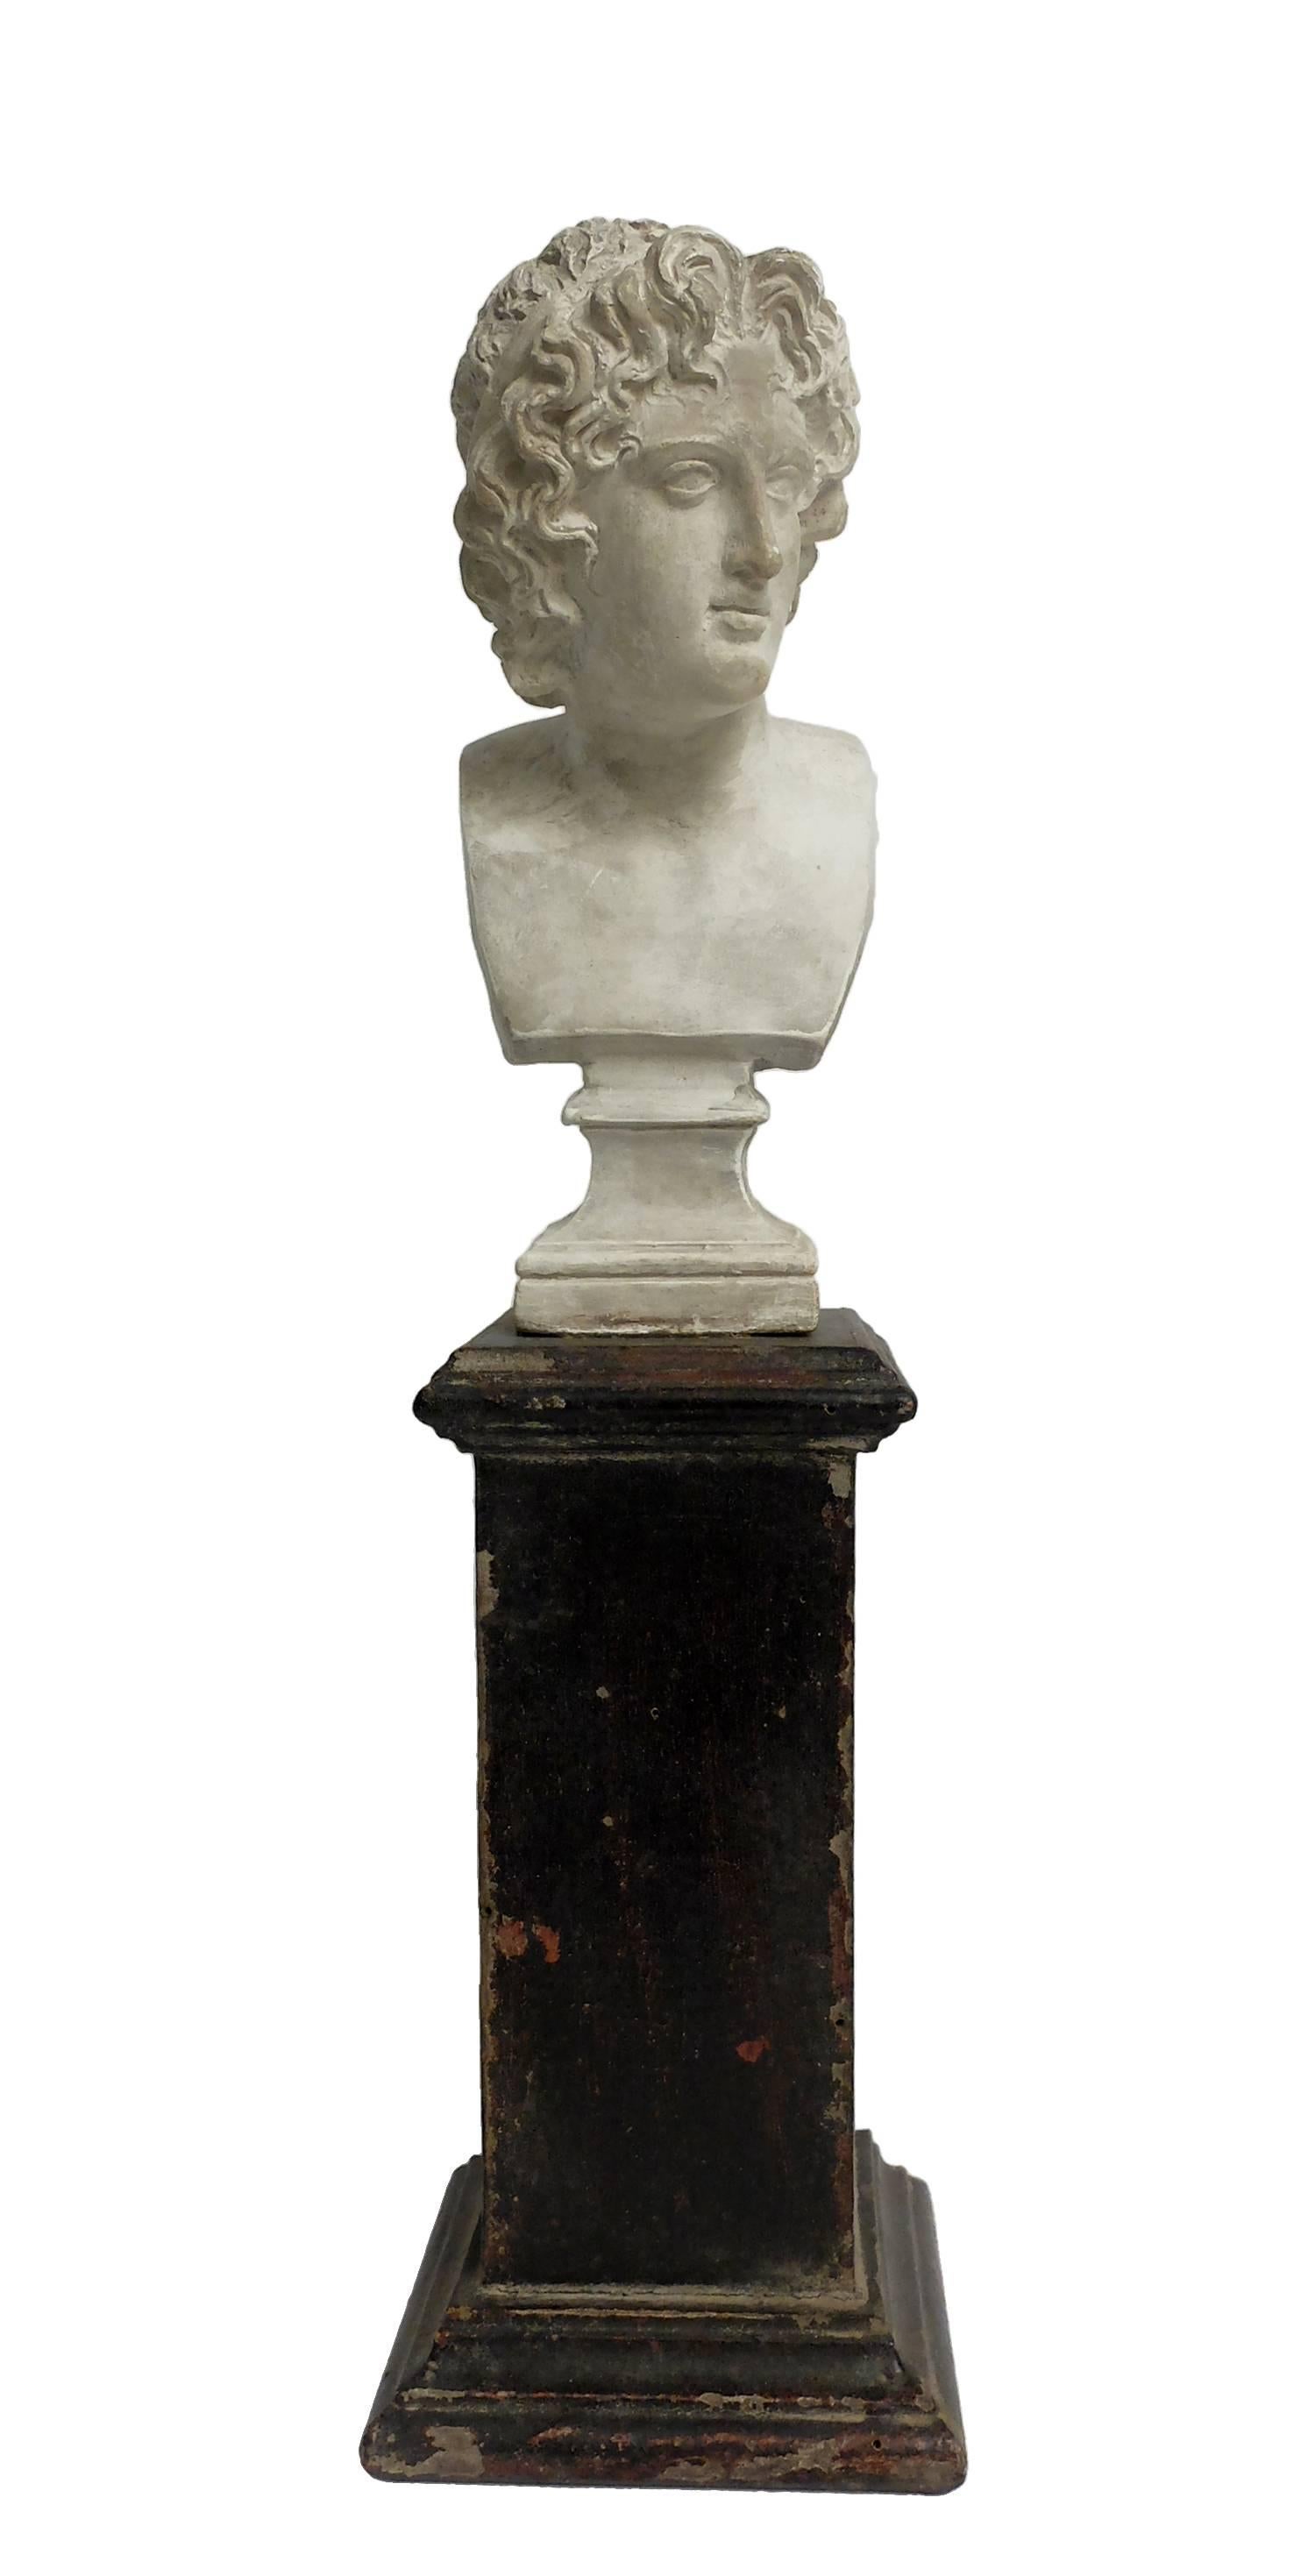 Above the plinths in black lacquered wood, shaped as square section column is set the academic cast of plaster of the busts of Lucius Verus and Alexander the great.